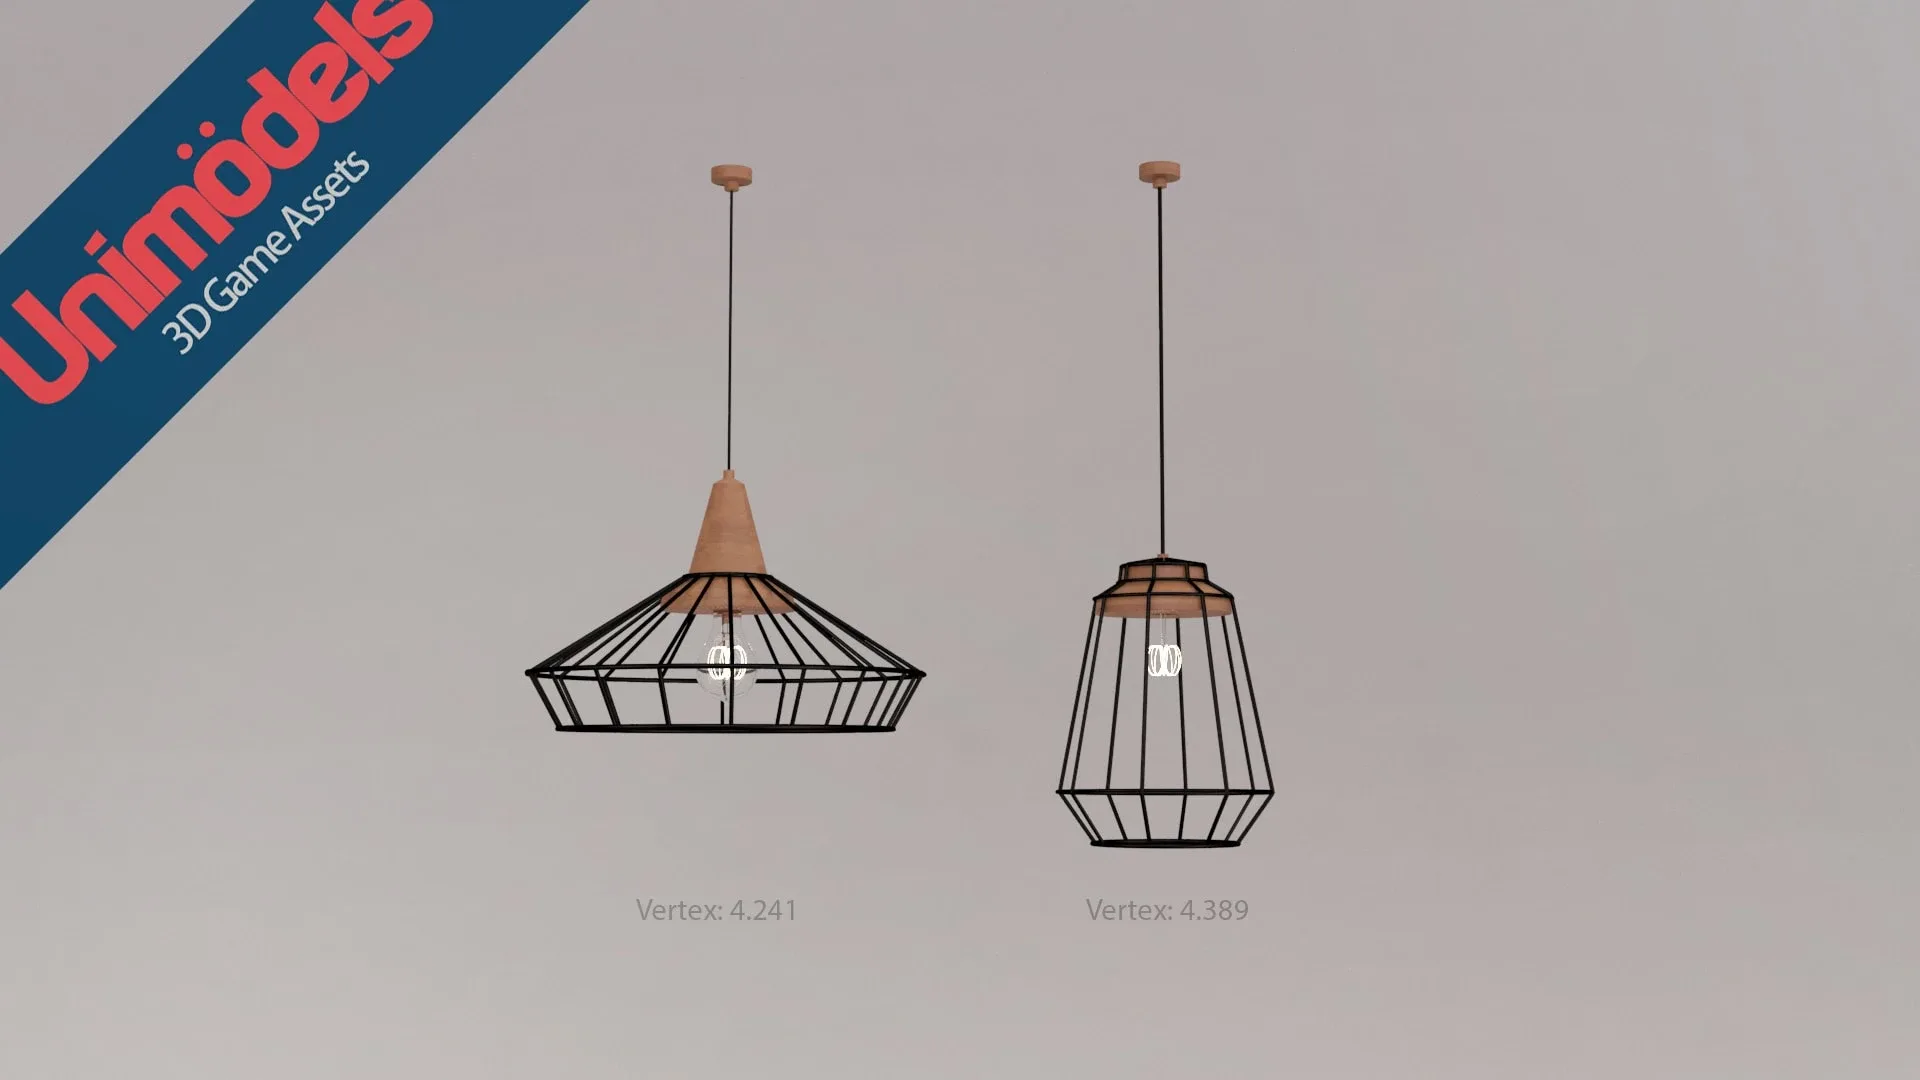 Unimodels Lamps Vol. 2 for Unity